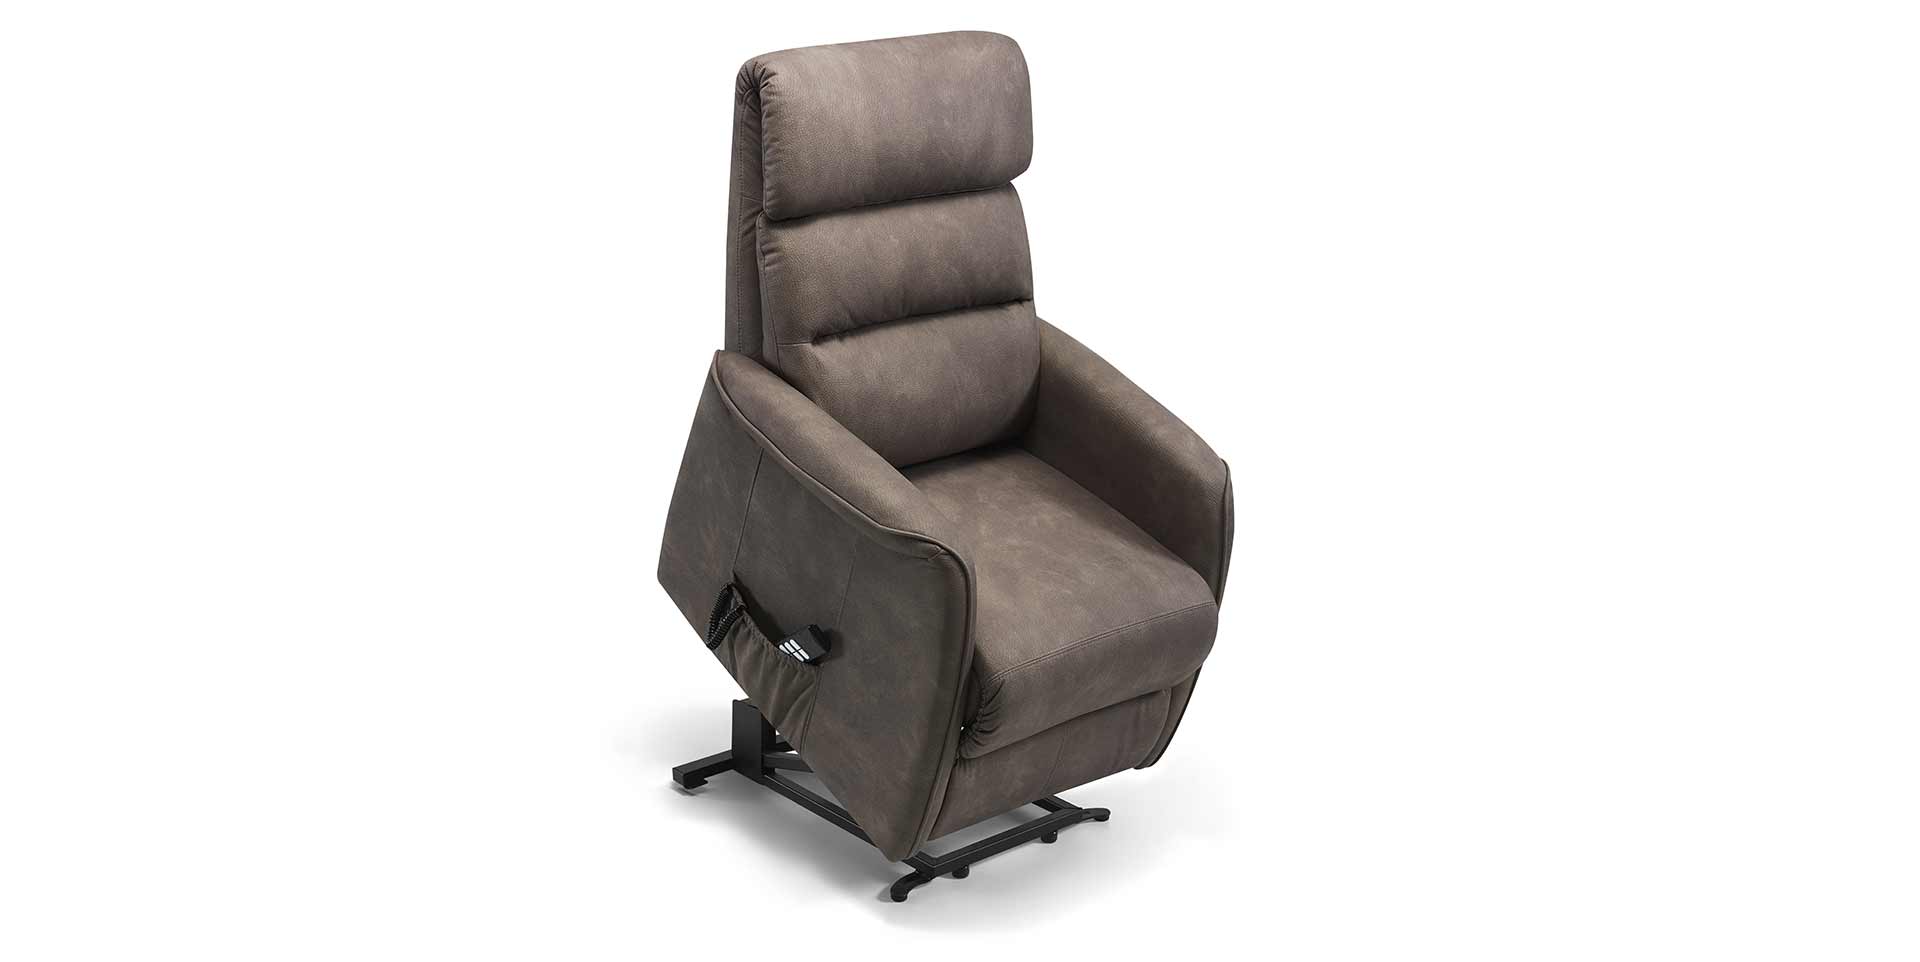 Slider Fauteuil relaxation SOFT (image 2)